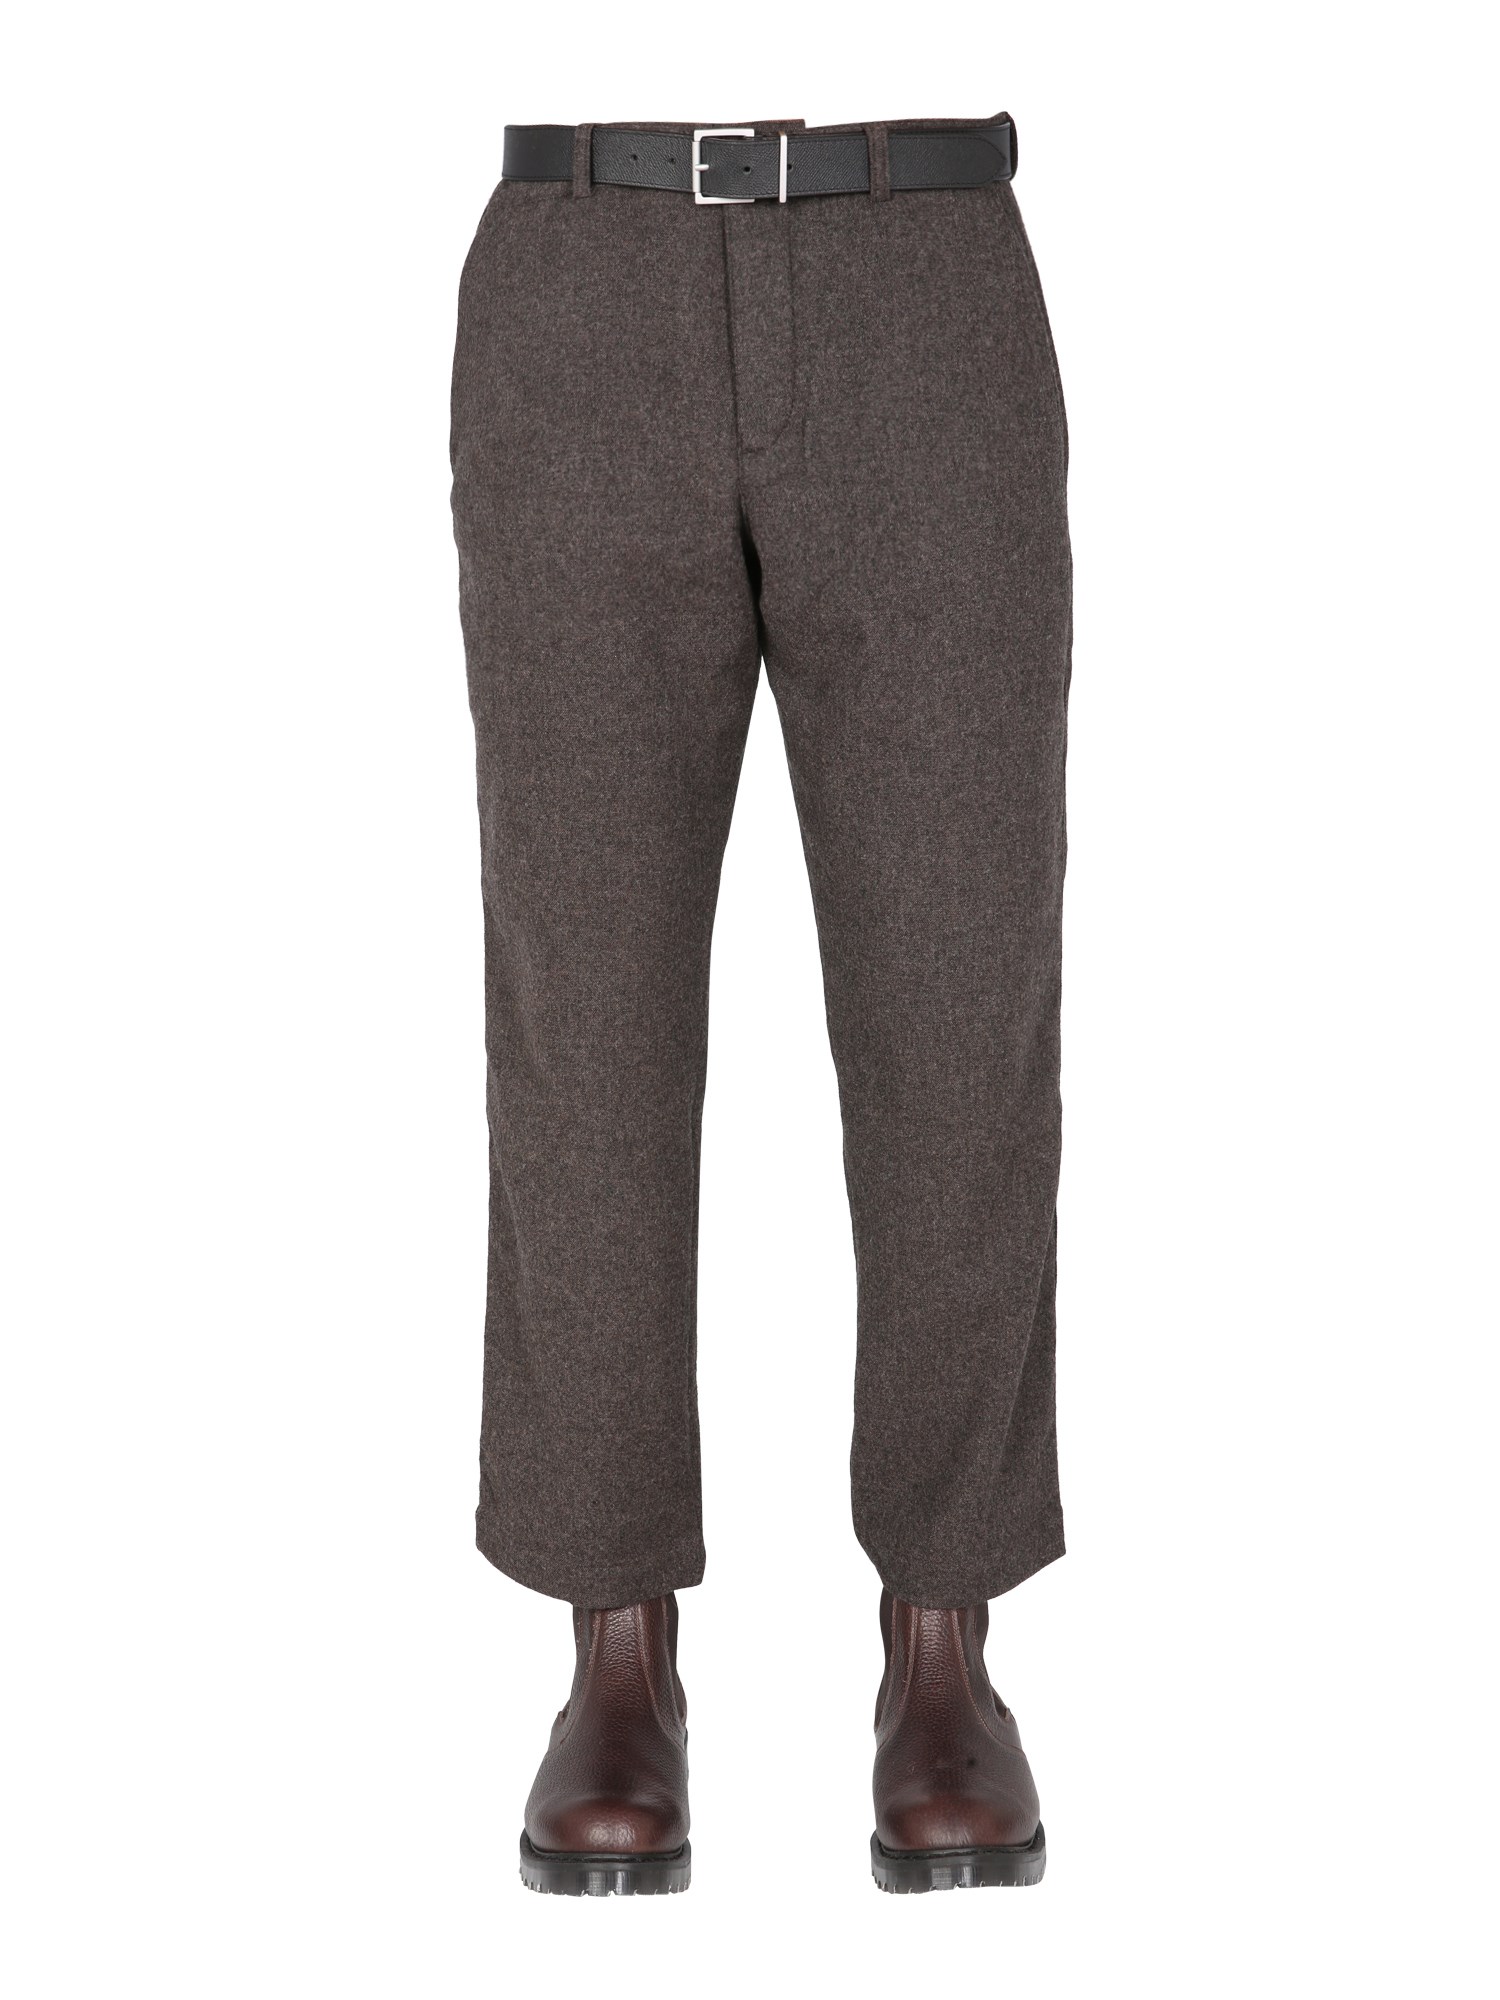 ymc "hand me down" trousers